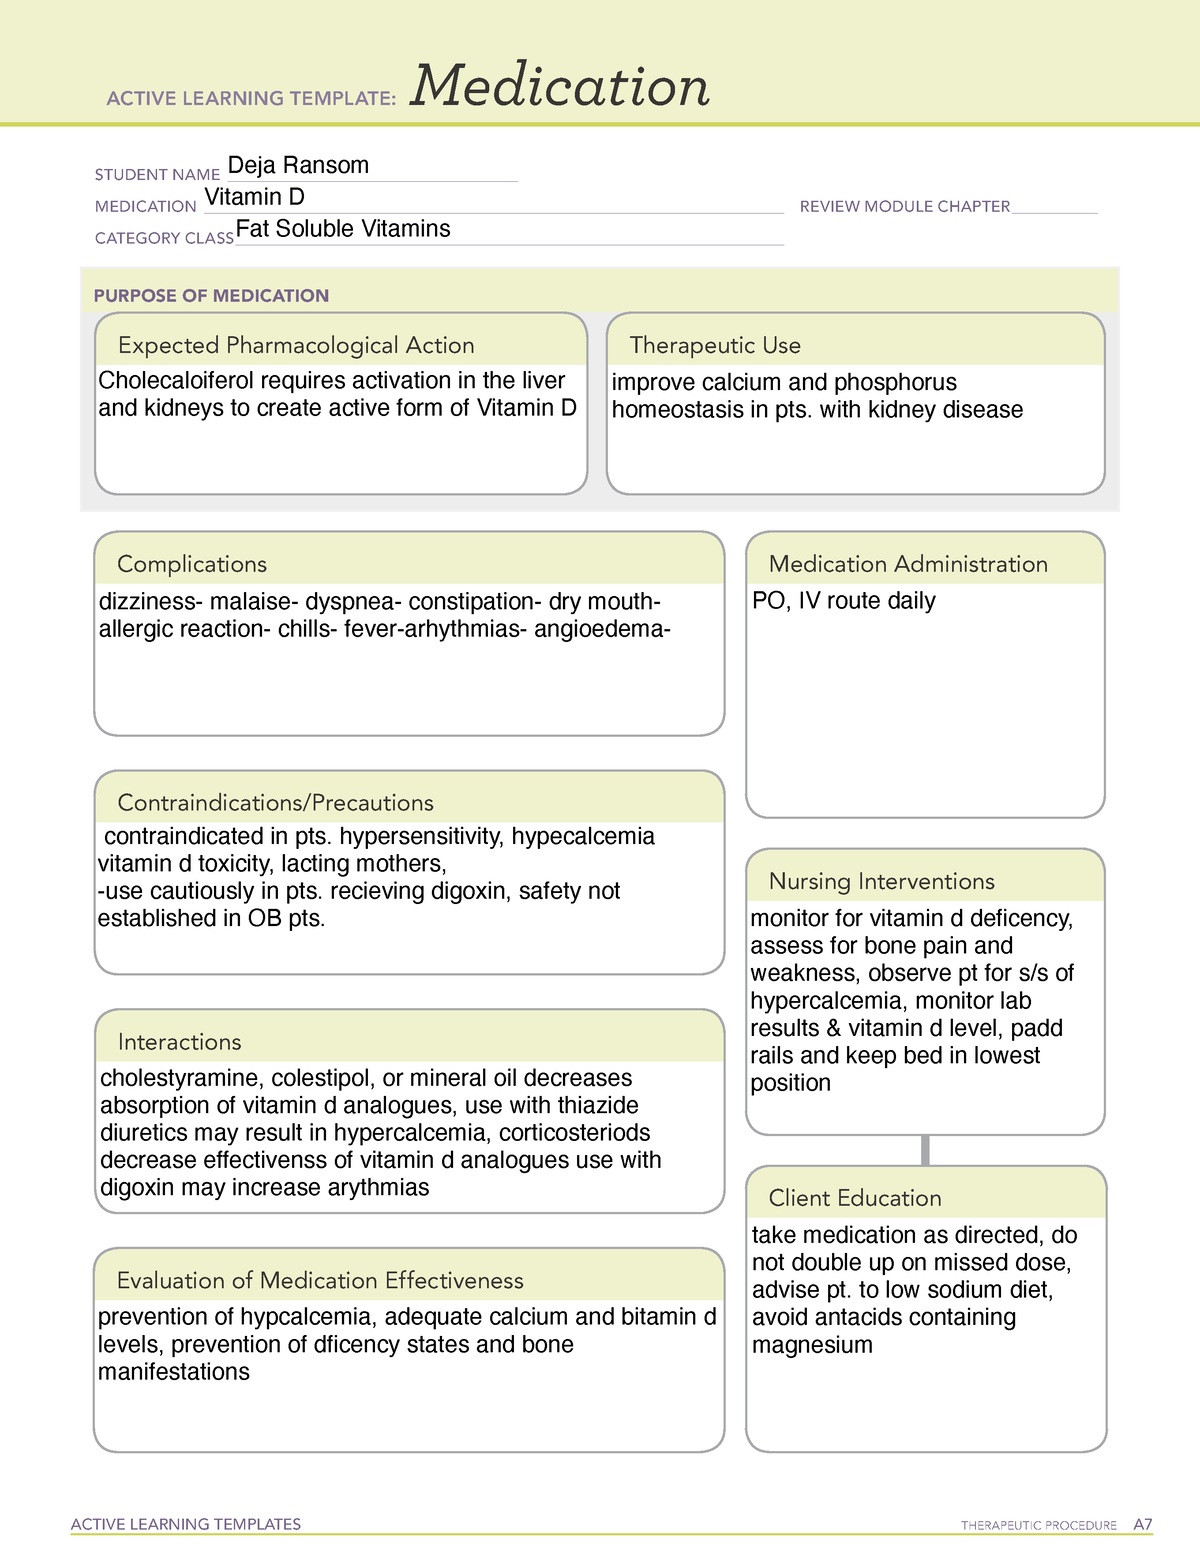 active-learning-template-medication-2-active-learning-templates-therapeutic-procedure-a